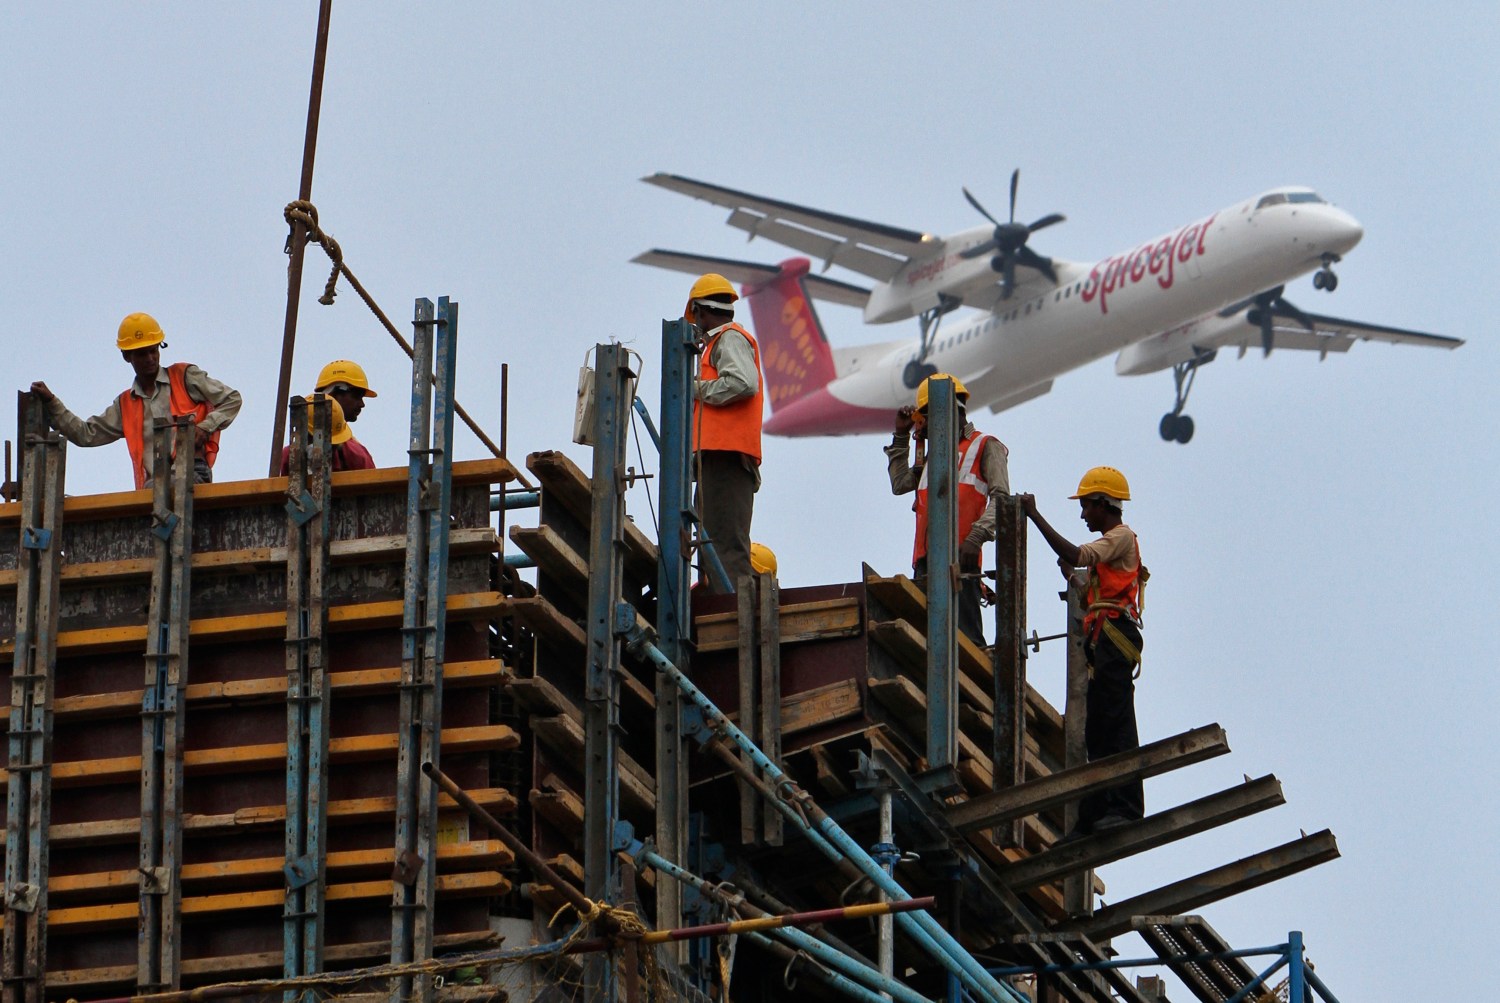 Construction workers erect scaffolding at the site of metro station as a SpiceJet Airlines aircraft flies past in the southern Indian city of Chennai May 14, 2012. Growth in Asia's third-largest economy is slowing as costlier credit and the impact of Europe's debt crisis on exports have sapped expansion. Gross domestic product rose 6.1 percent in December quarter from a year earlier, the slowest pace in near three years. REUTERS/Babu (INDIA - Tags: TRANSPORT BUSINESS CONSTRUCTION) - GM1E85E1KU101